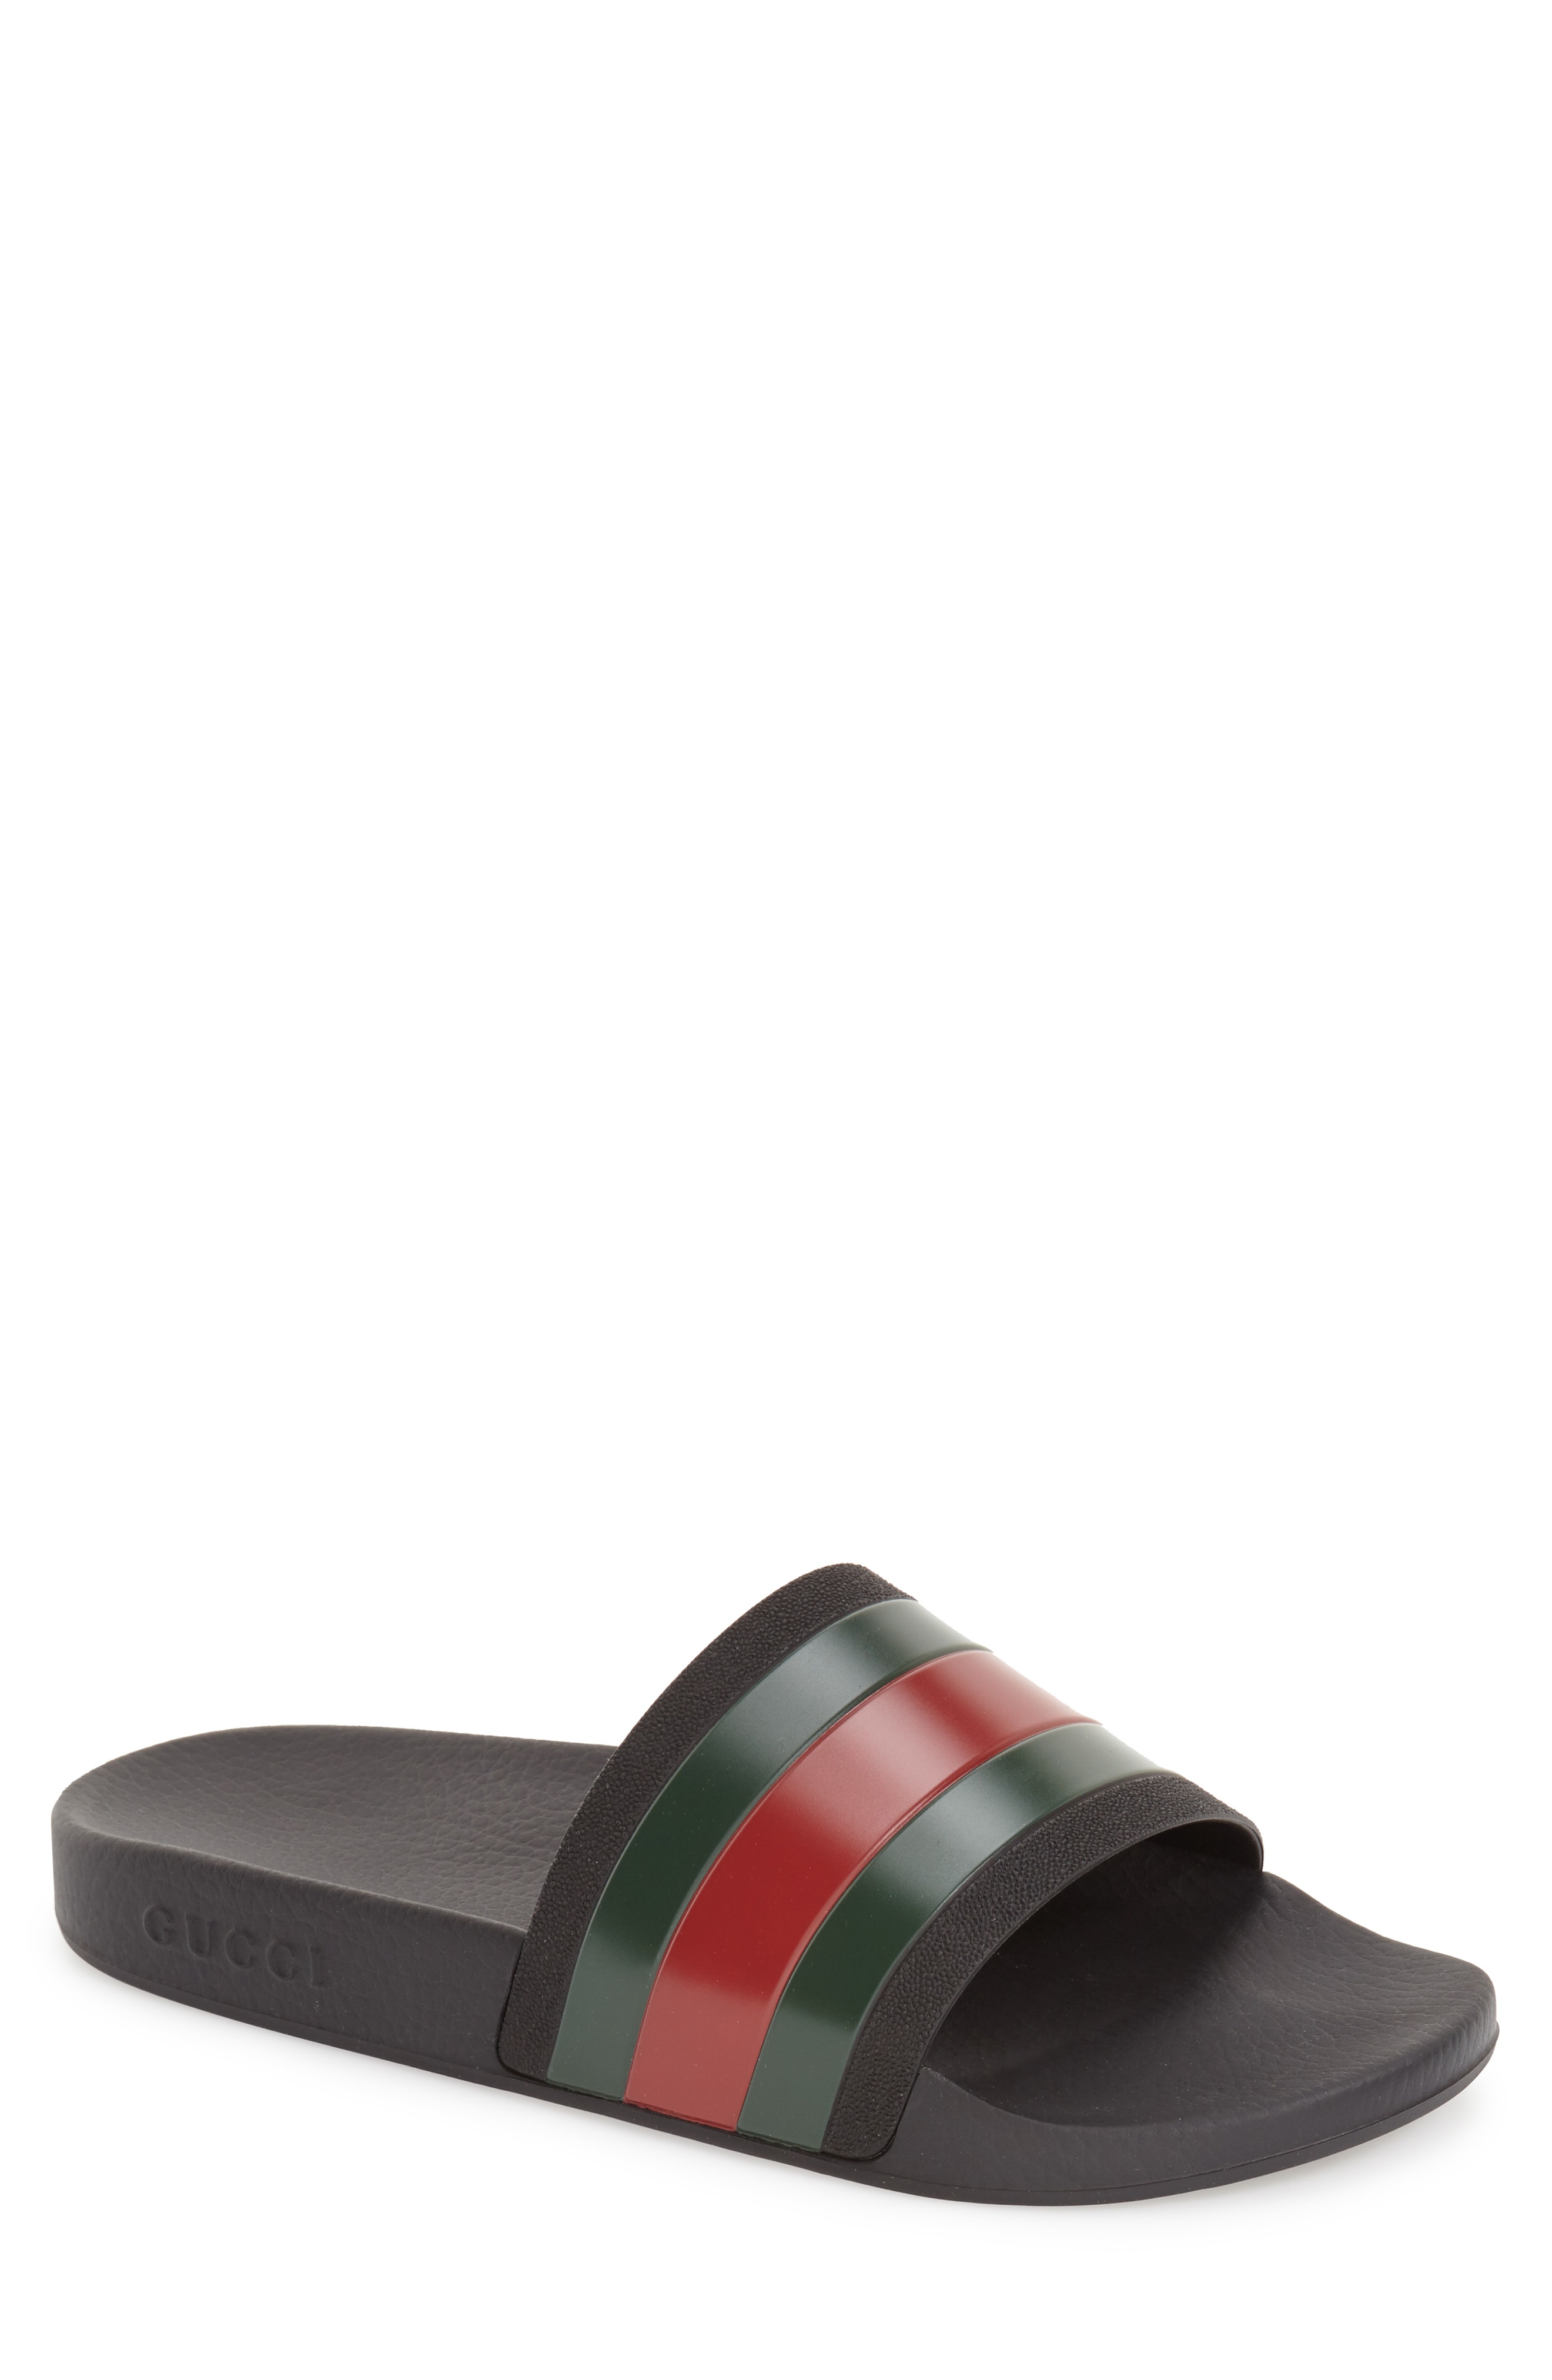 gucci slides red and black